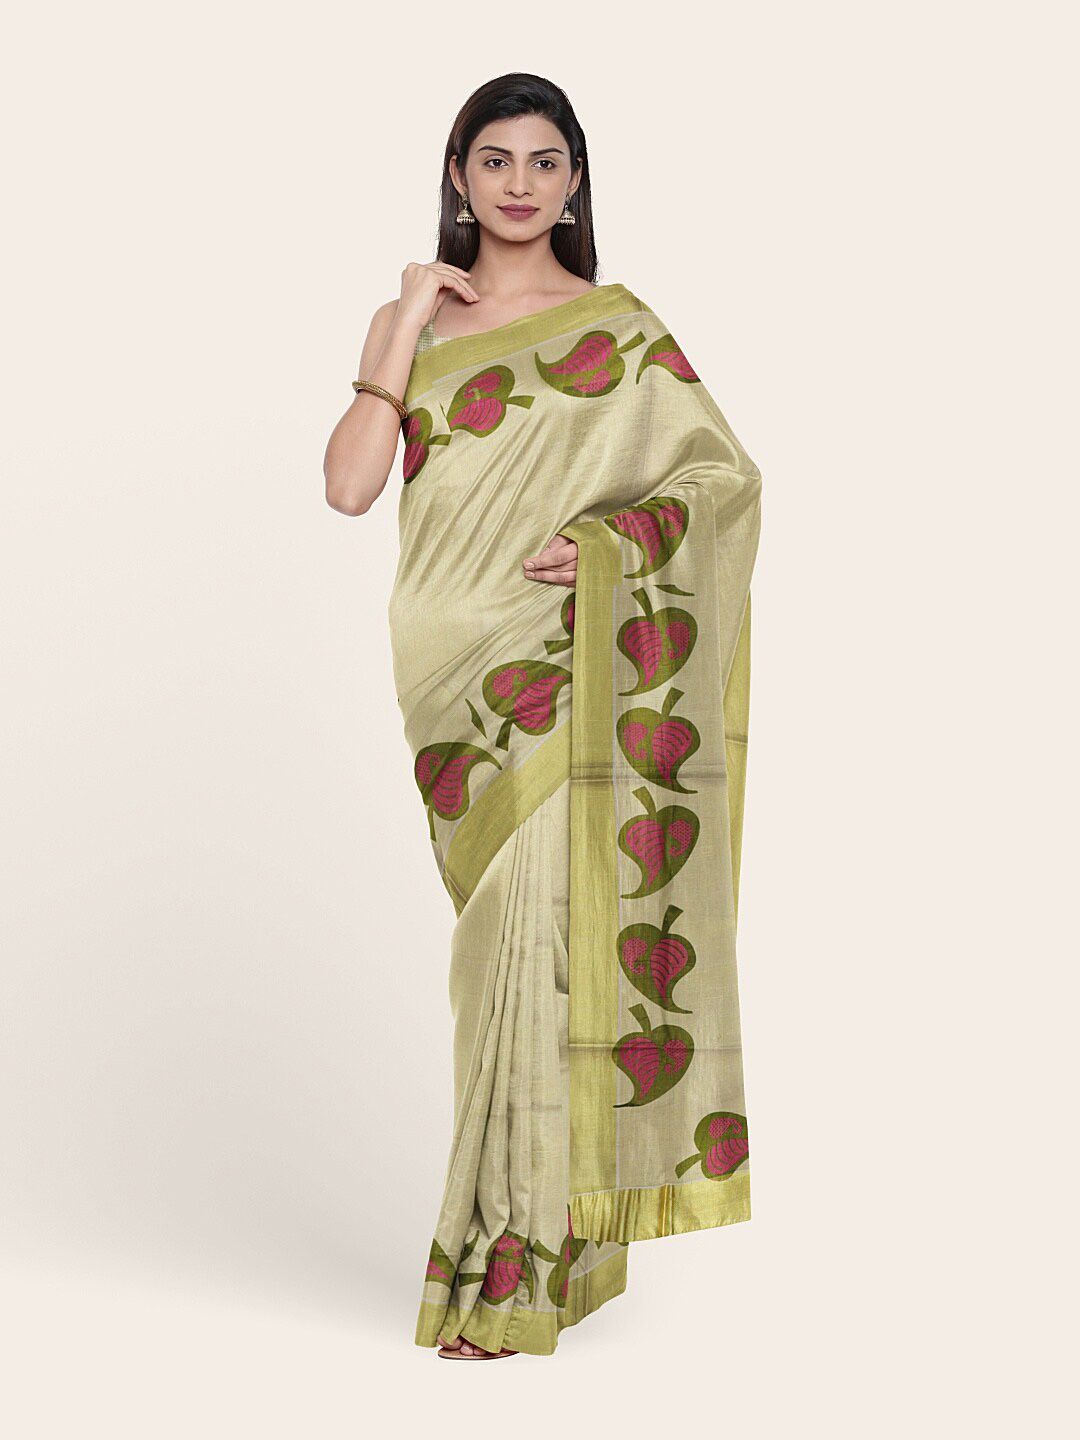 Pothys Gold-Toned & Green Ethnic Motifs Pure Cotton Saree Price in India